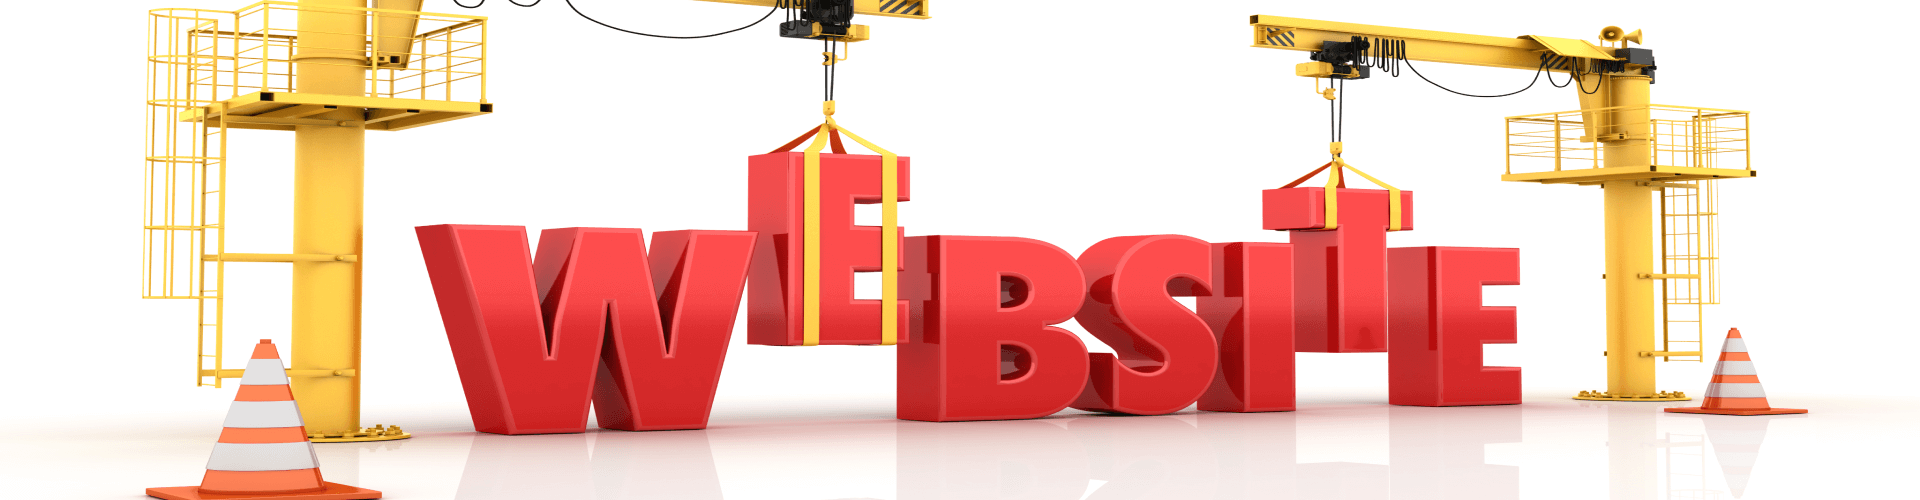 The best website builders for 2021 detailed